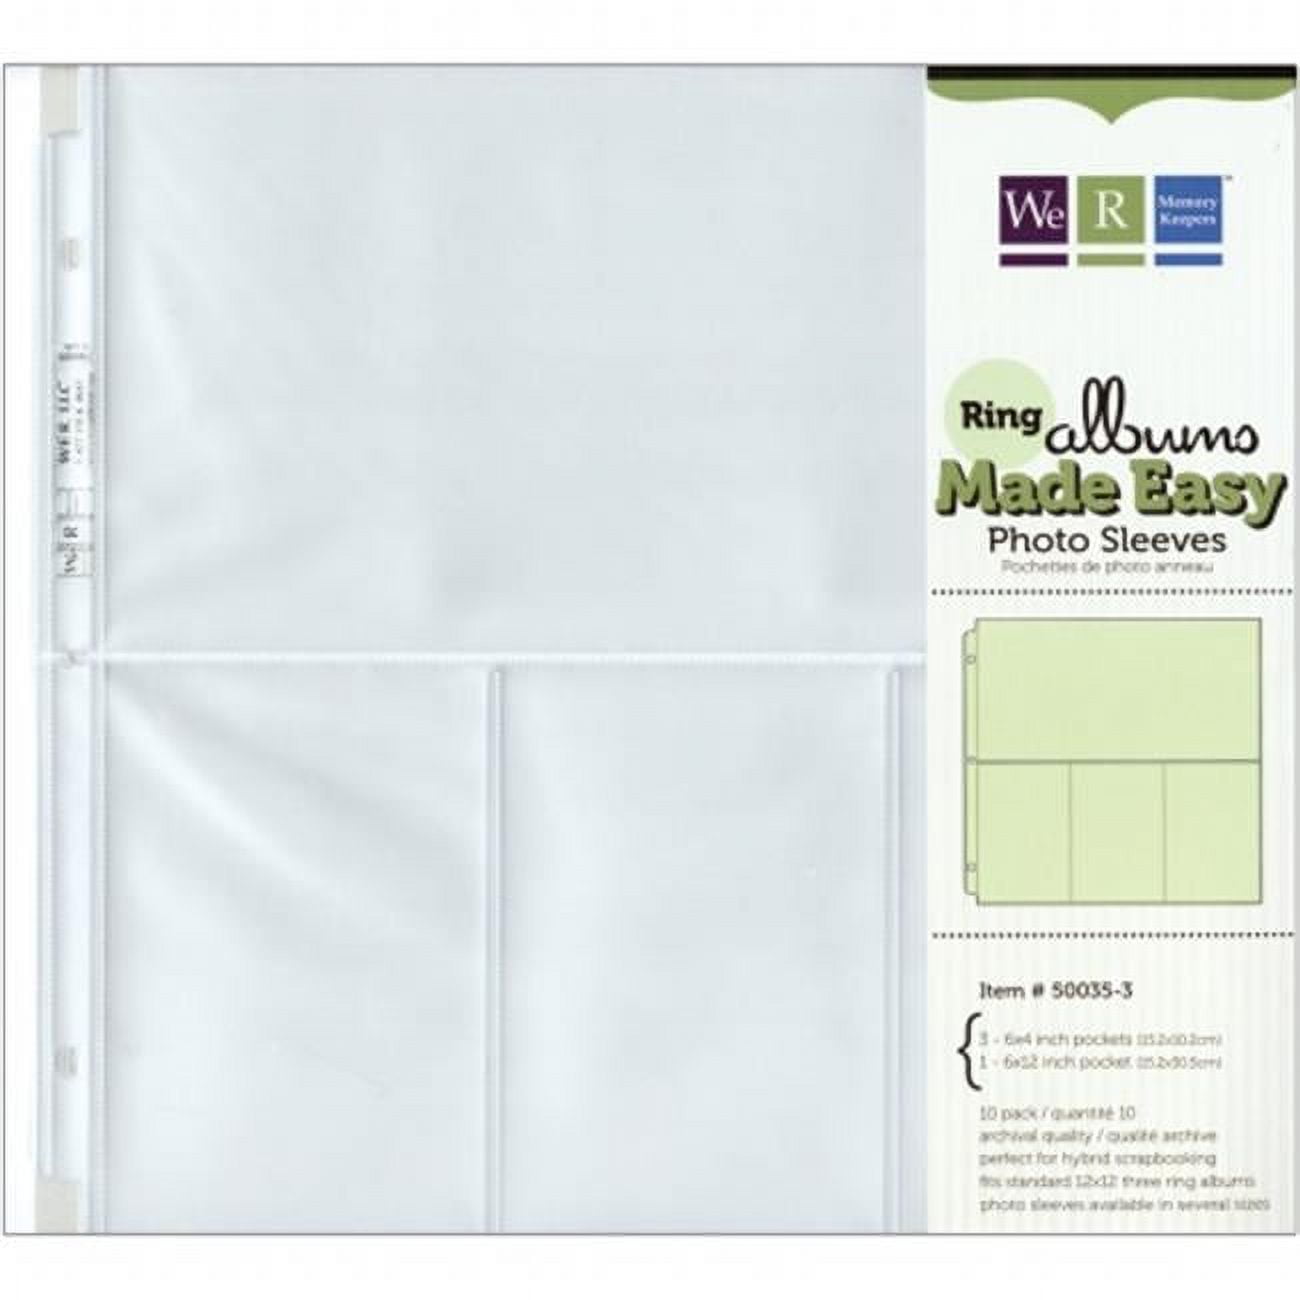 dunwell photo album refill pages 12x12 - (4x6 landscape, 10 pack) holds 120  4x6 photos, 4x6 photo sleeves for 3 ring binder